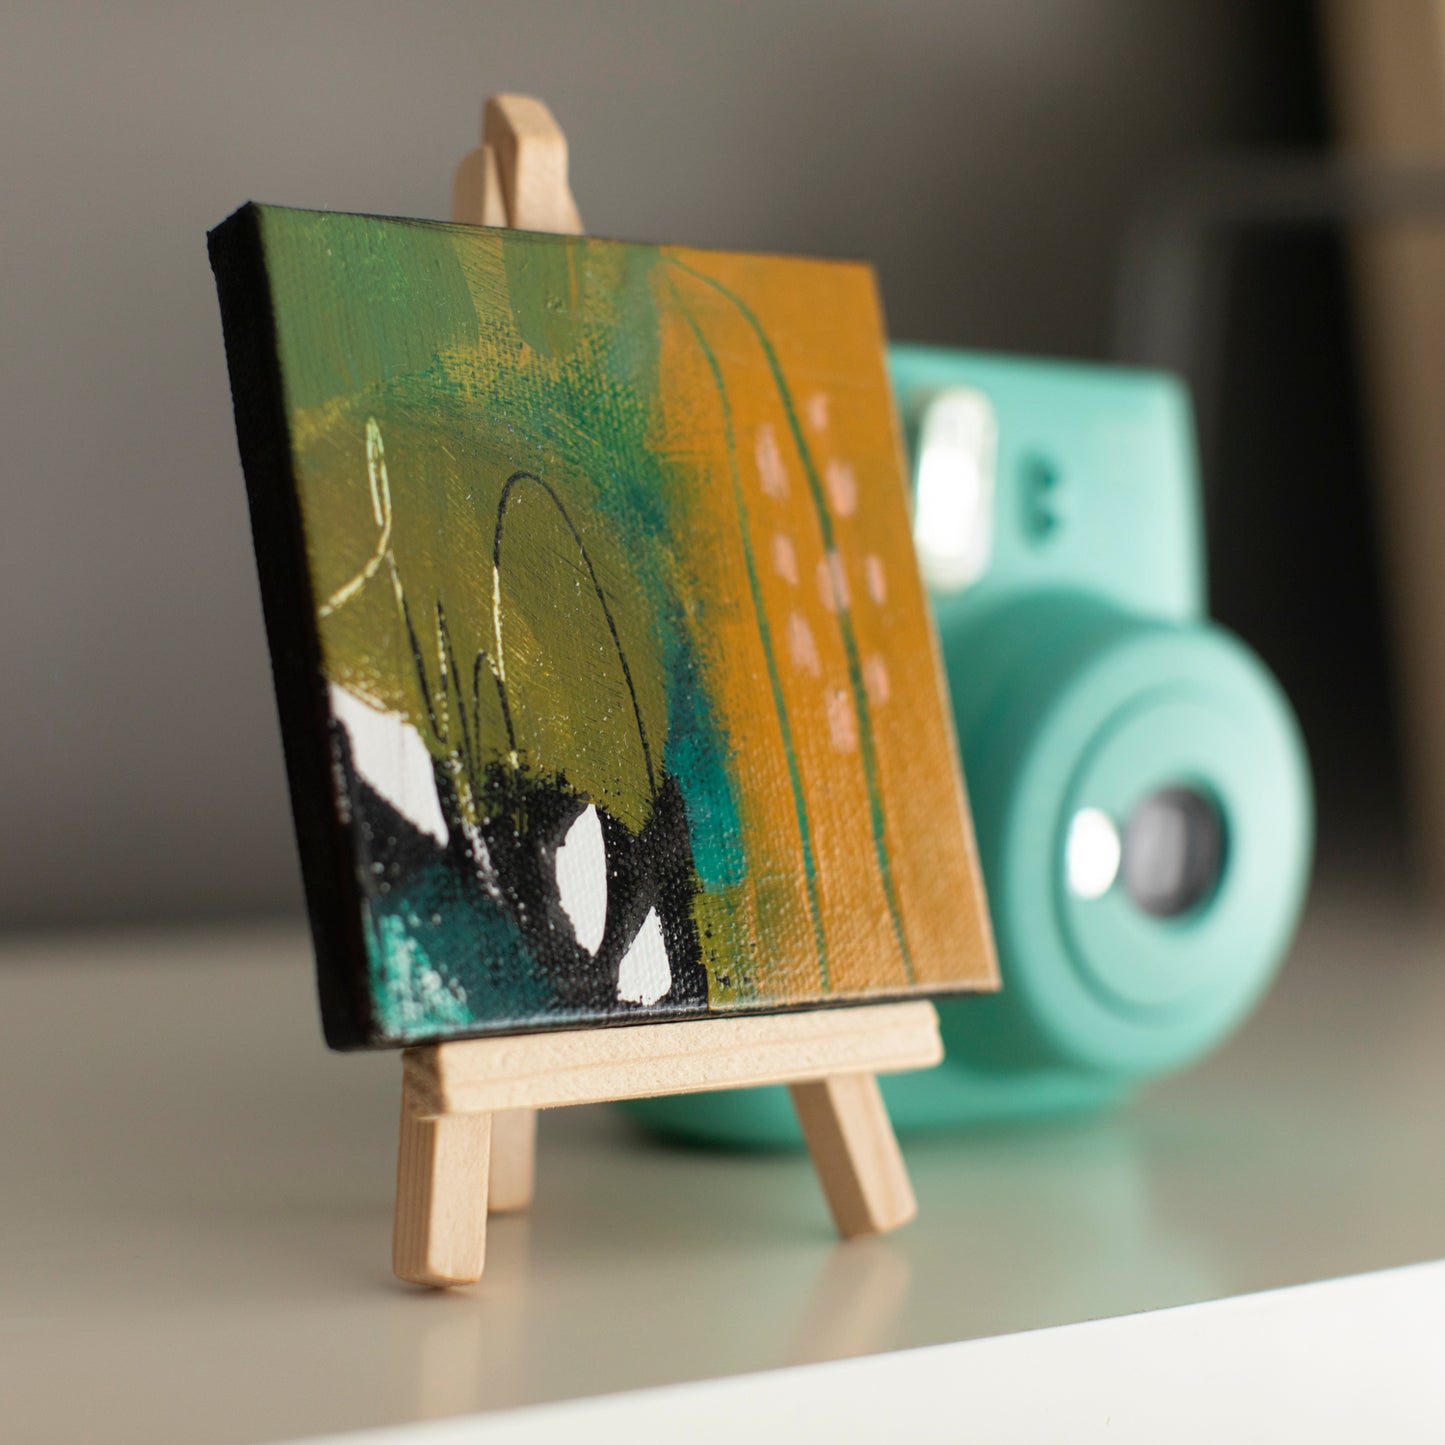 "Mini 1" - 4"x 4" canvas and easel